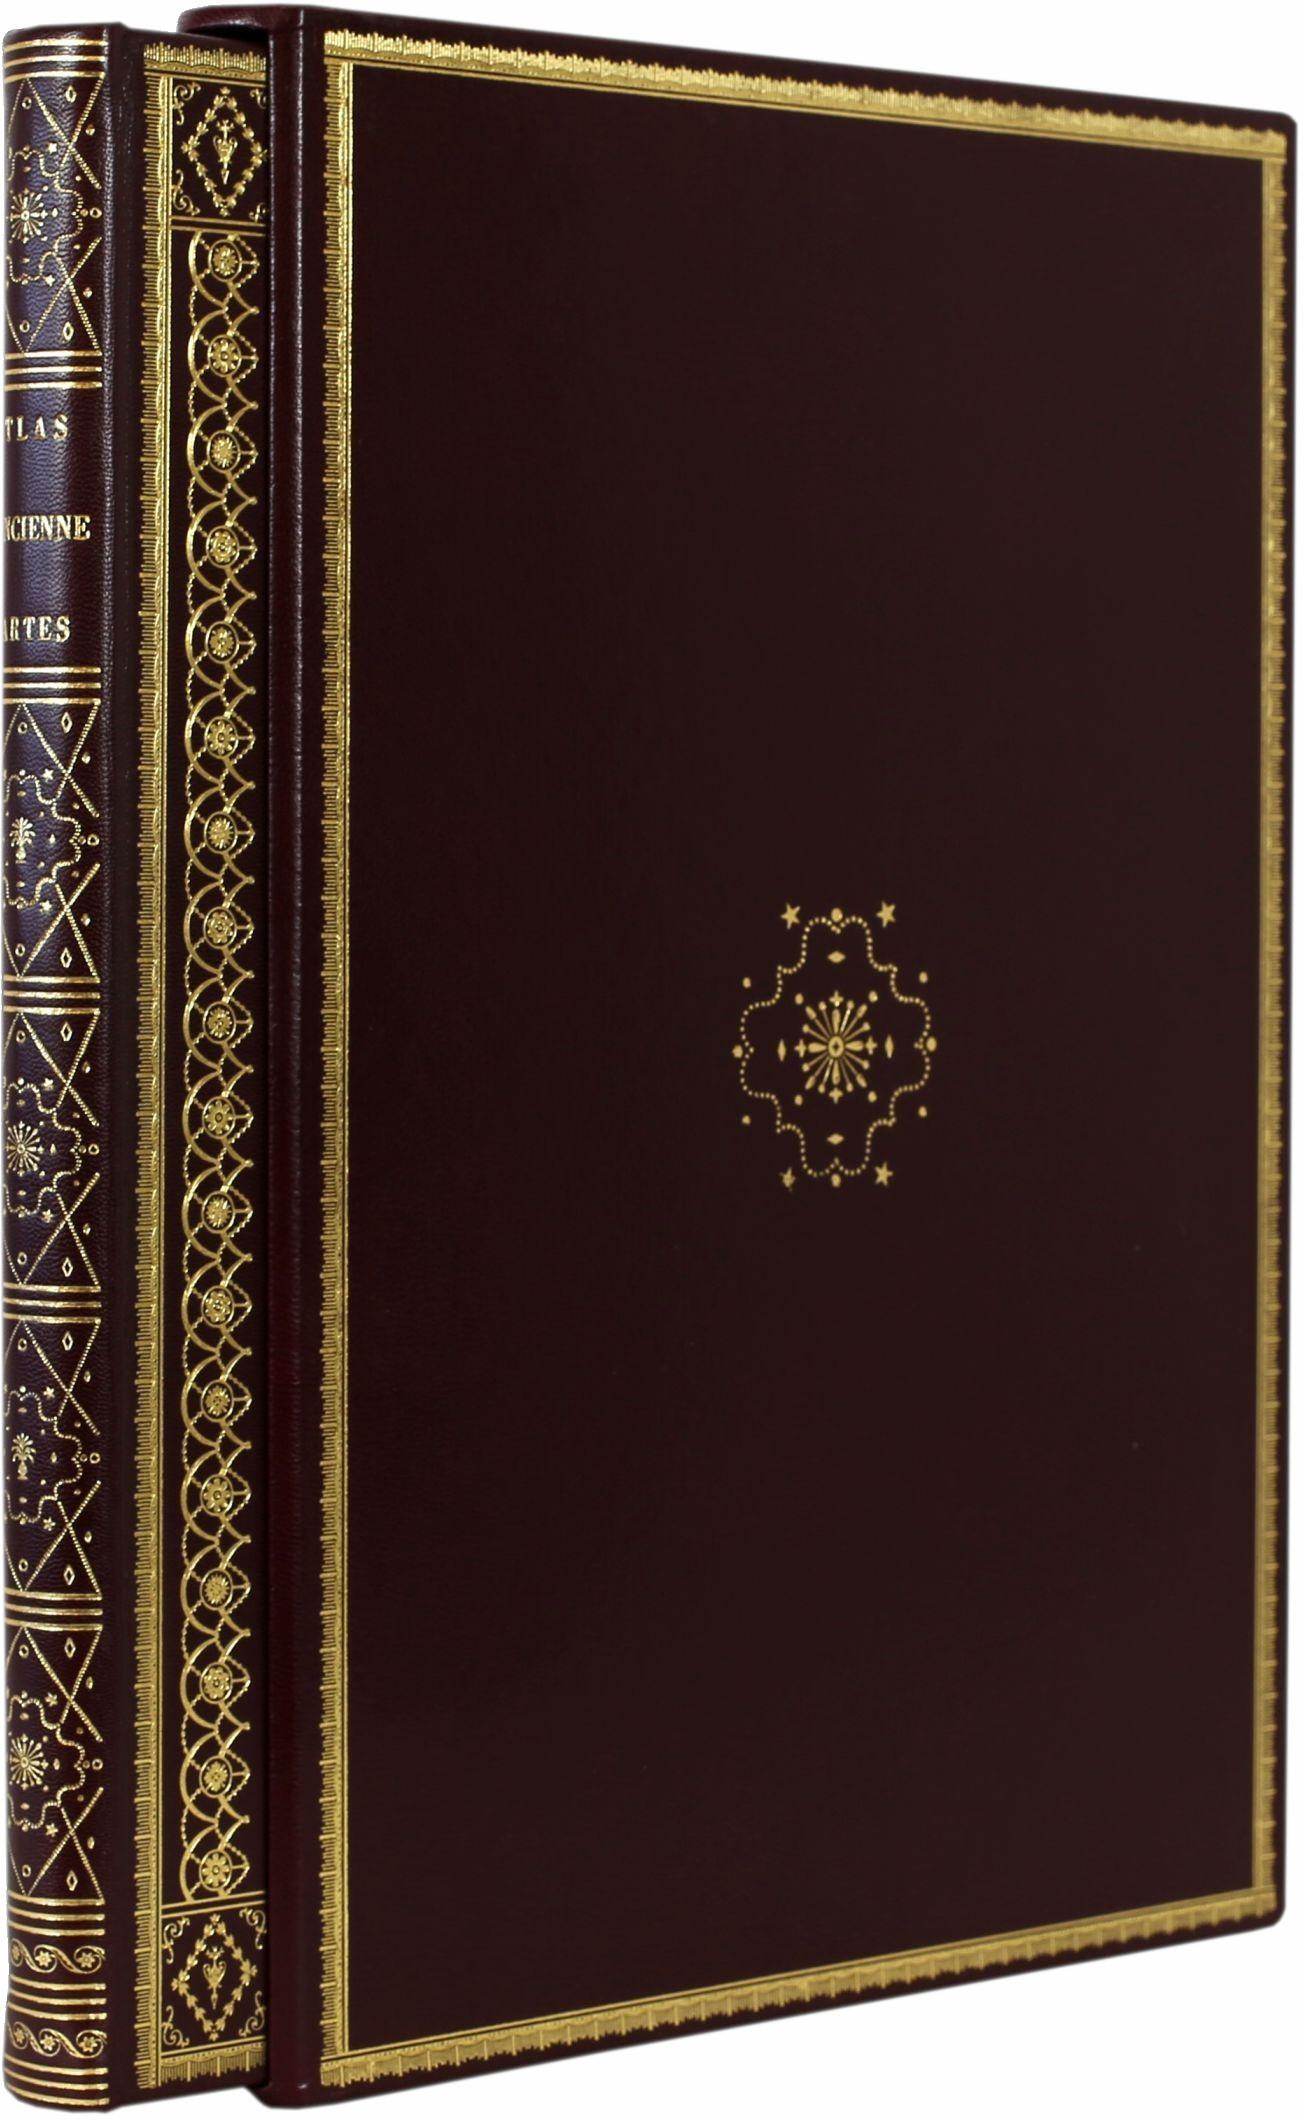 This is a one-time only facsimile edition limited to 987 copies of an atlas from the Renaissance, the Atlas Vallard, owned by the Huntington Library in San Marino, CA, made by combining the highest technology with the mastery of the craftsmen